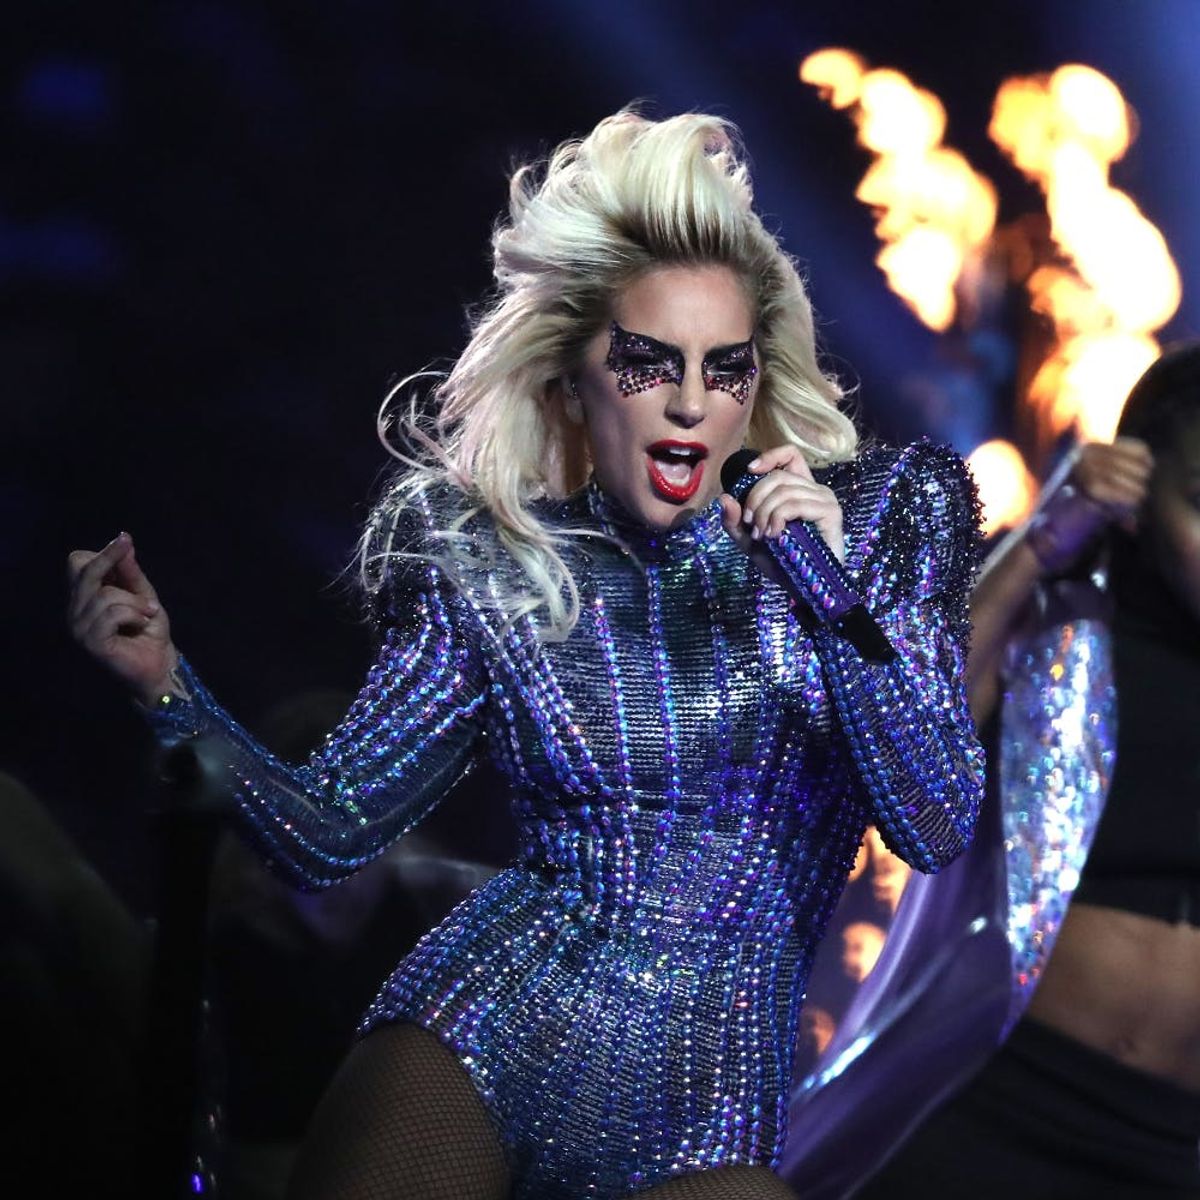 This Is the Super Subtle Way Lady Gaga Made Her Super Bowl Halftime Show Political